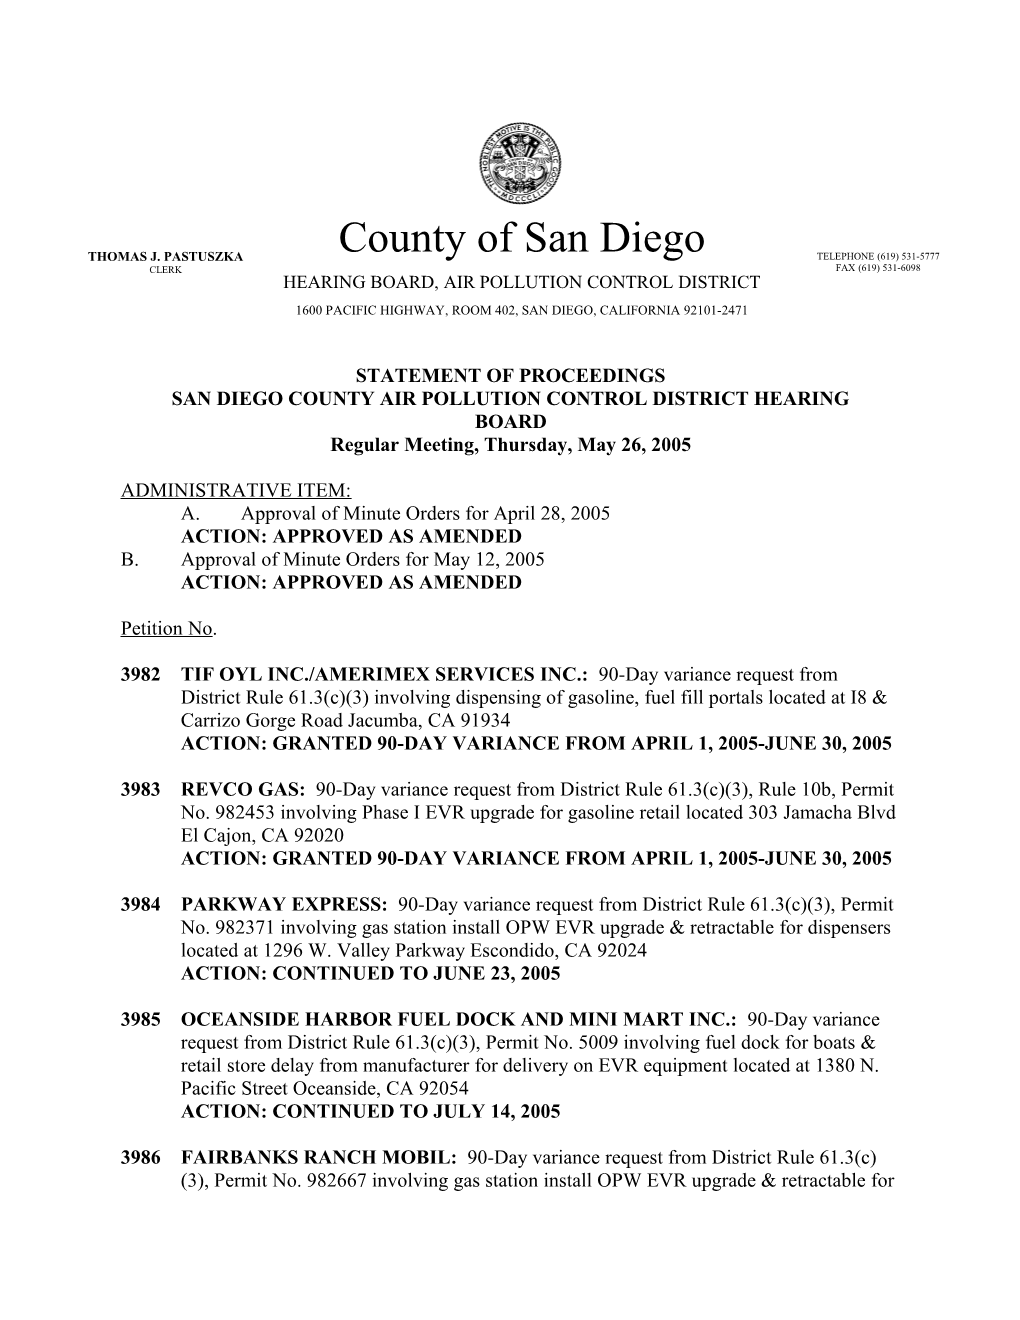 San Diego County Air Pollution Control District Hearing